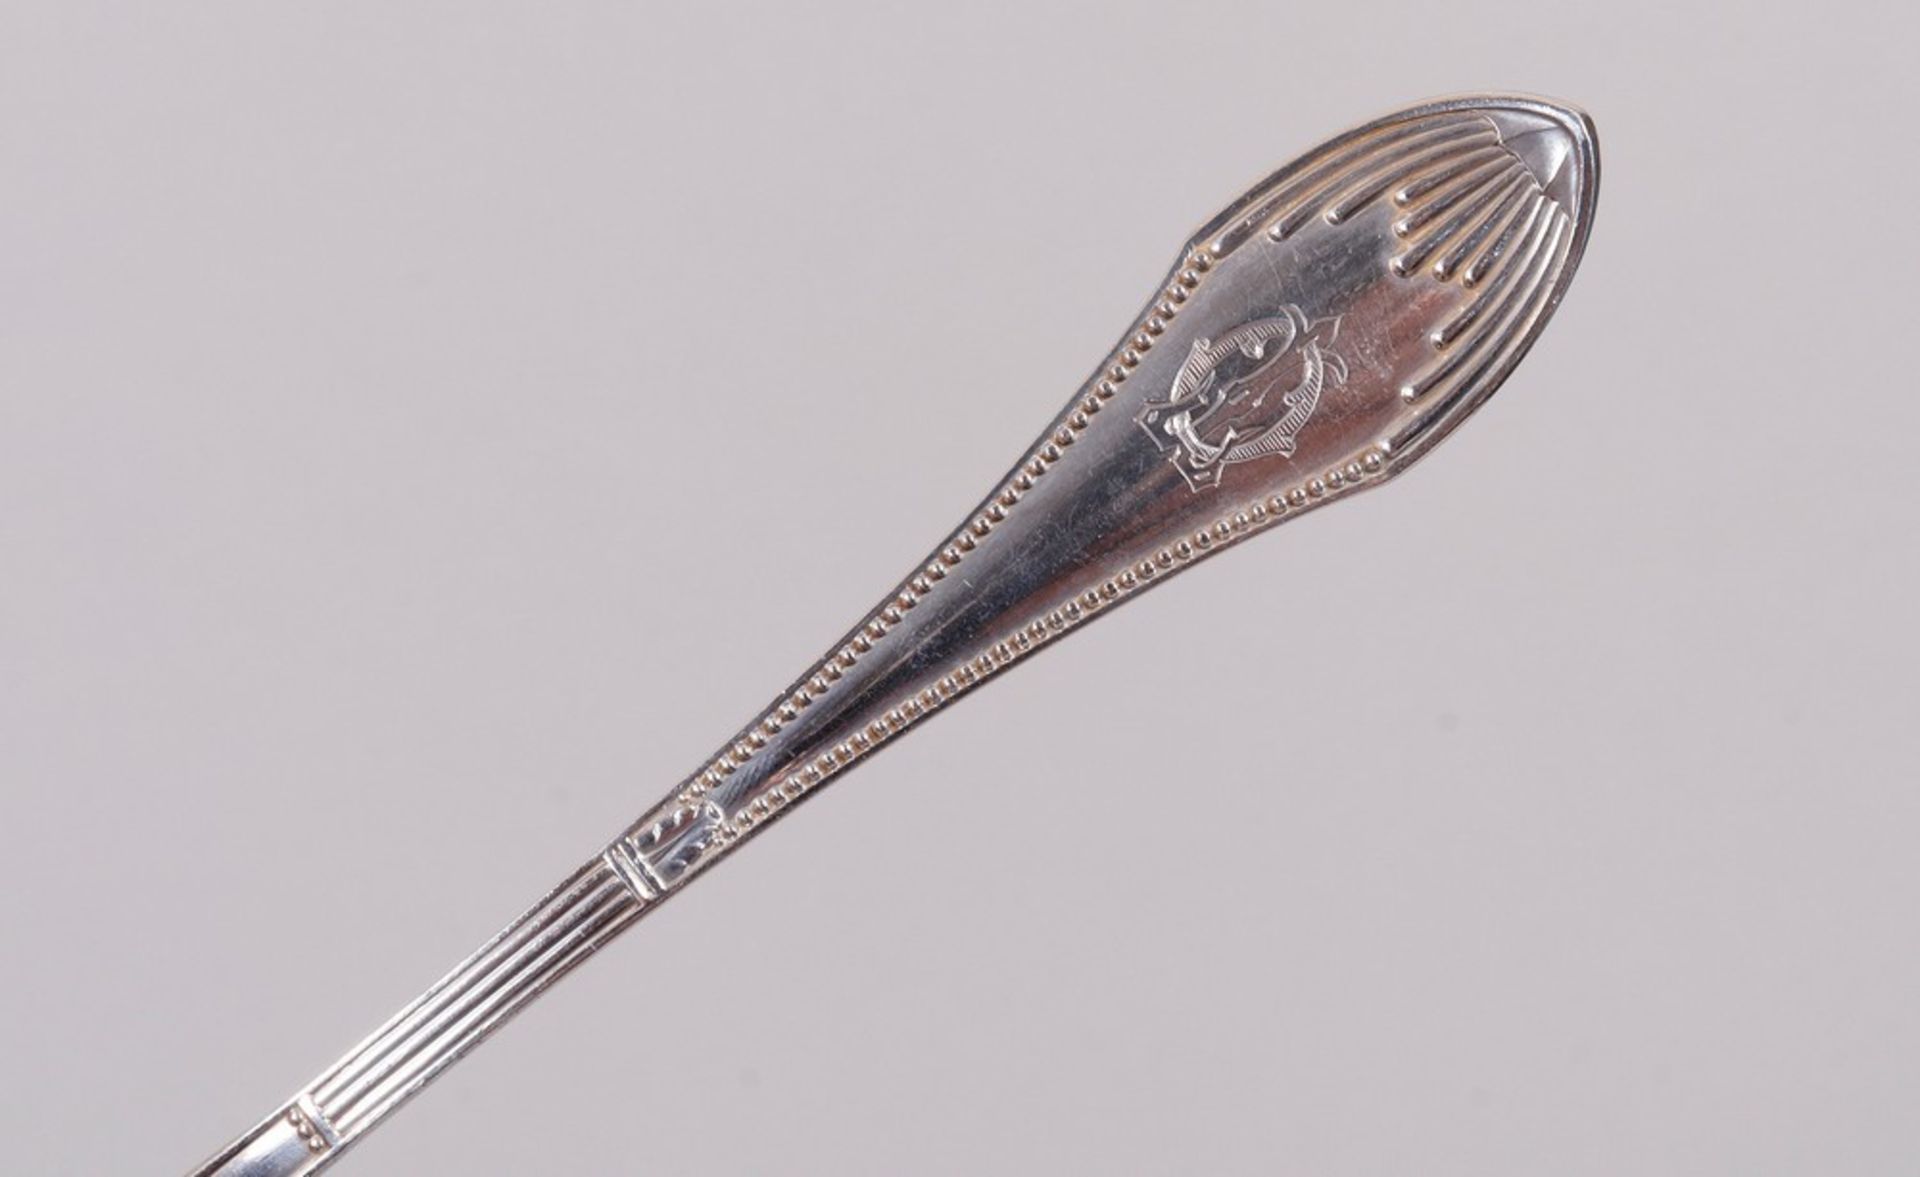 Large cutlery set for 8 people, 800 silver, Wilkens & Söhne, Bremen c. 1900, 75 pieces - Image 2 of 6